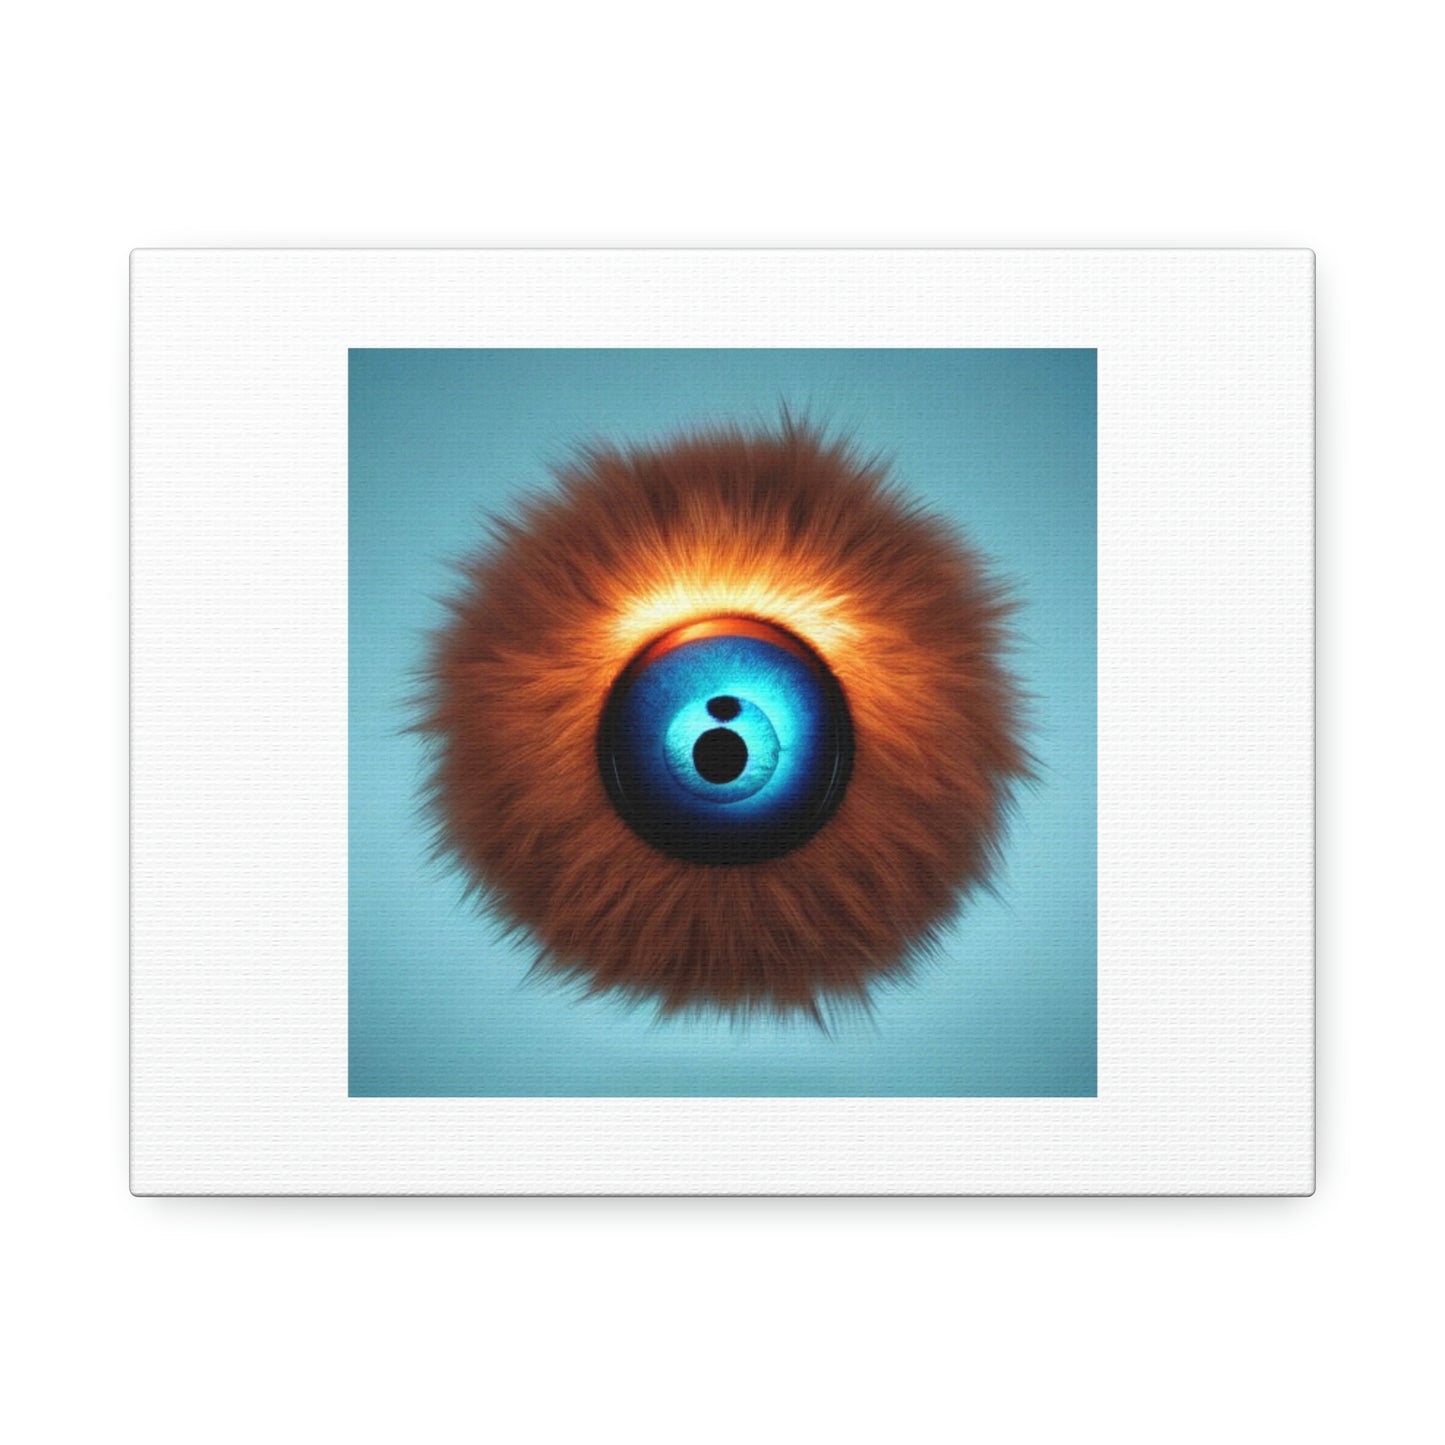 Abstract Tech House Music In A Human Eye Digital Art 'Designed by AI' on Canvas